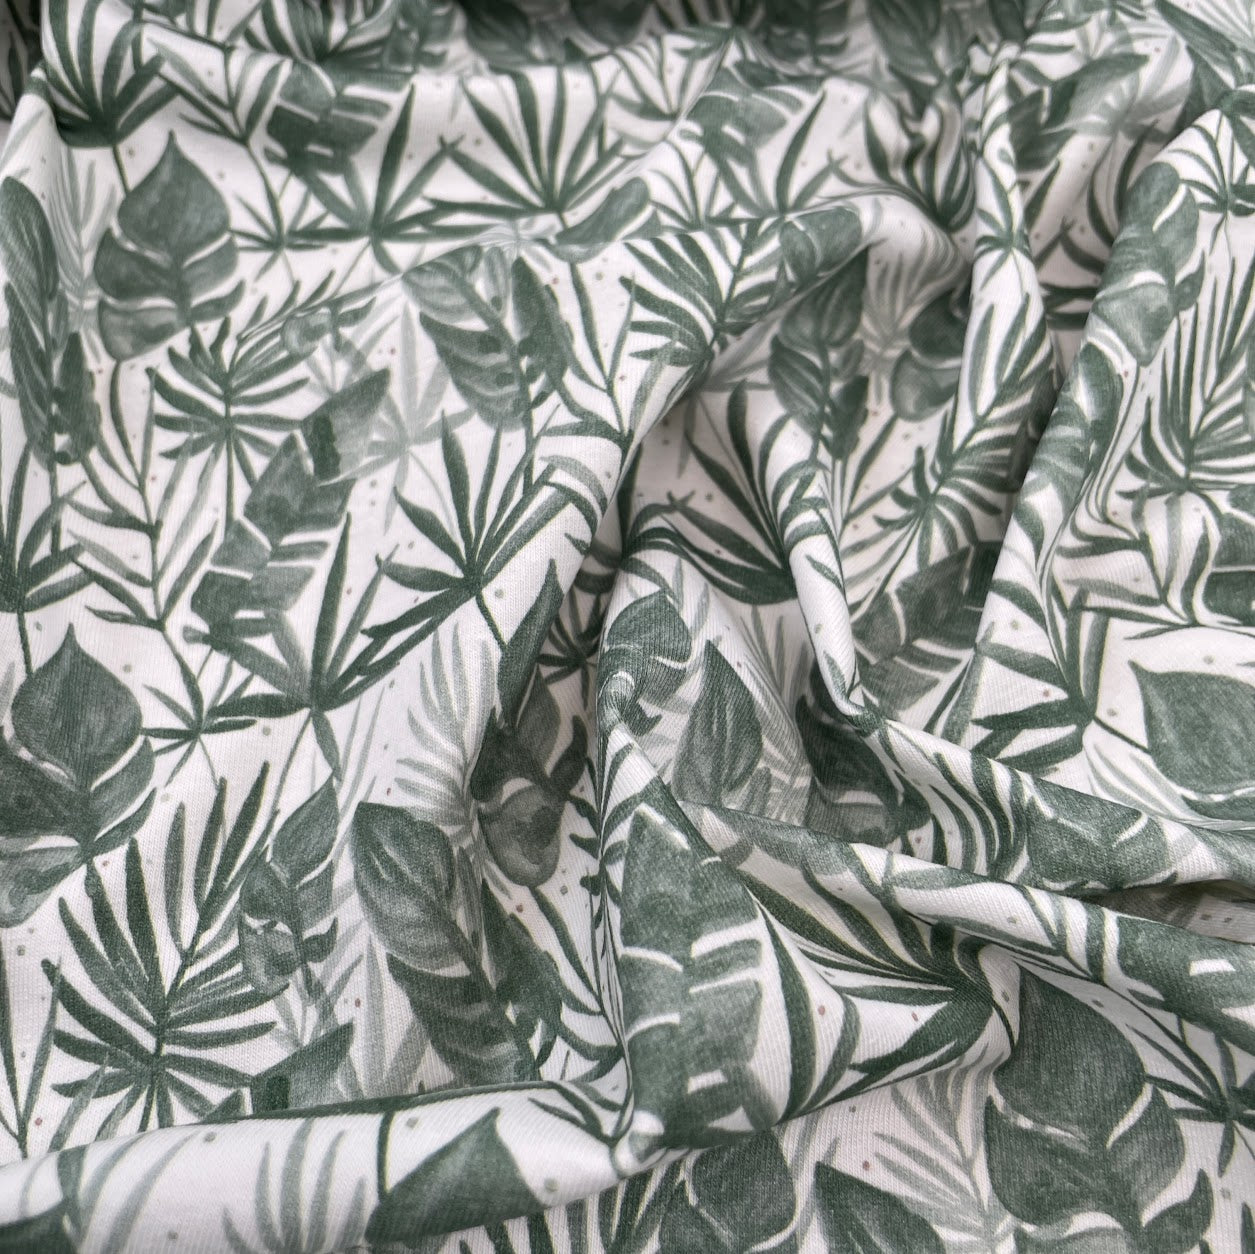 Tropical Leaves - Digitally Printed Cotton Jersey Knit